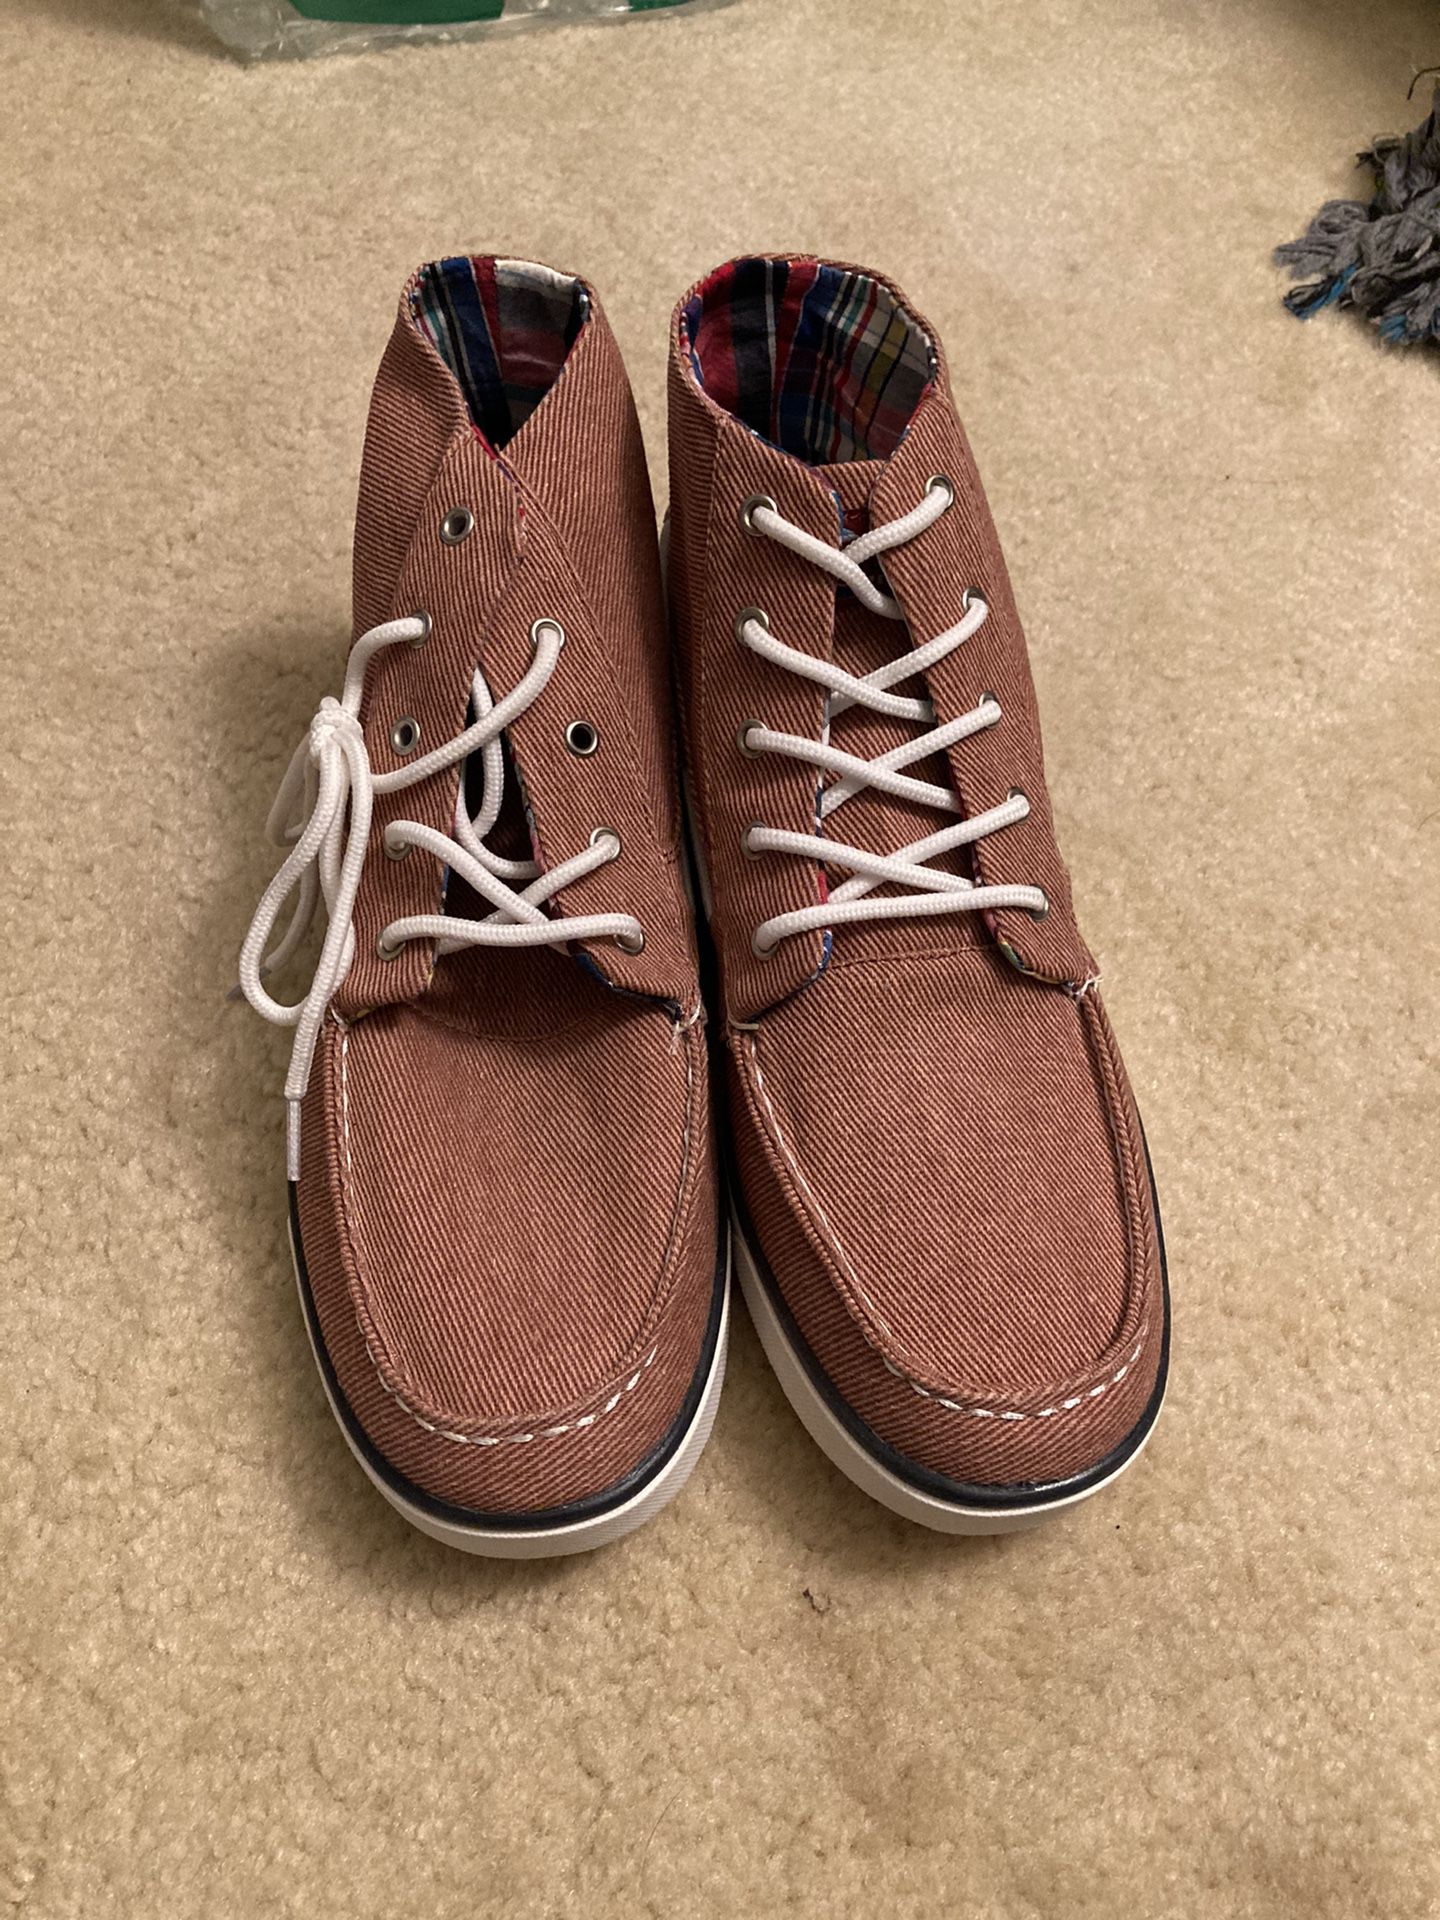 Sperry style ankle shoes - Red